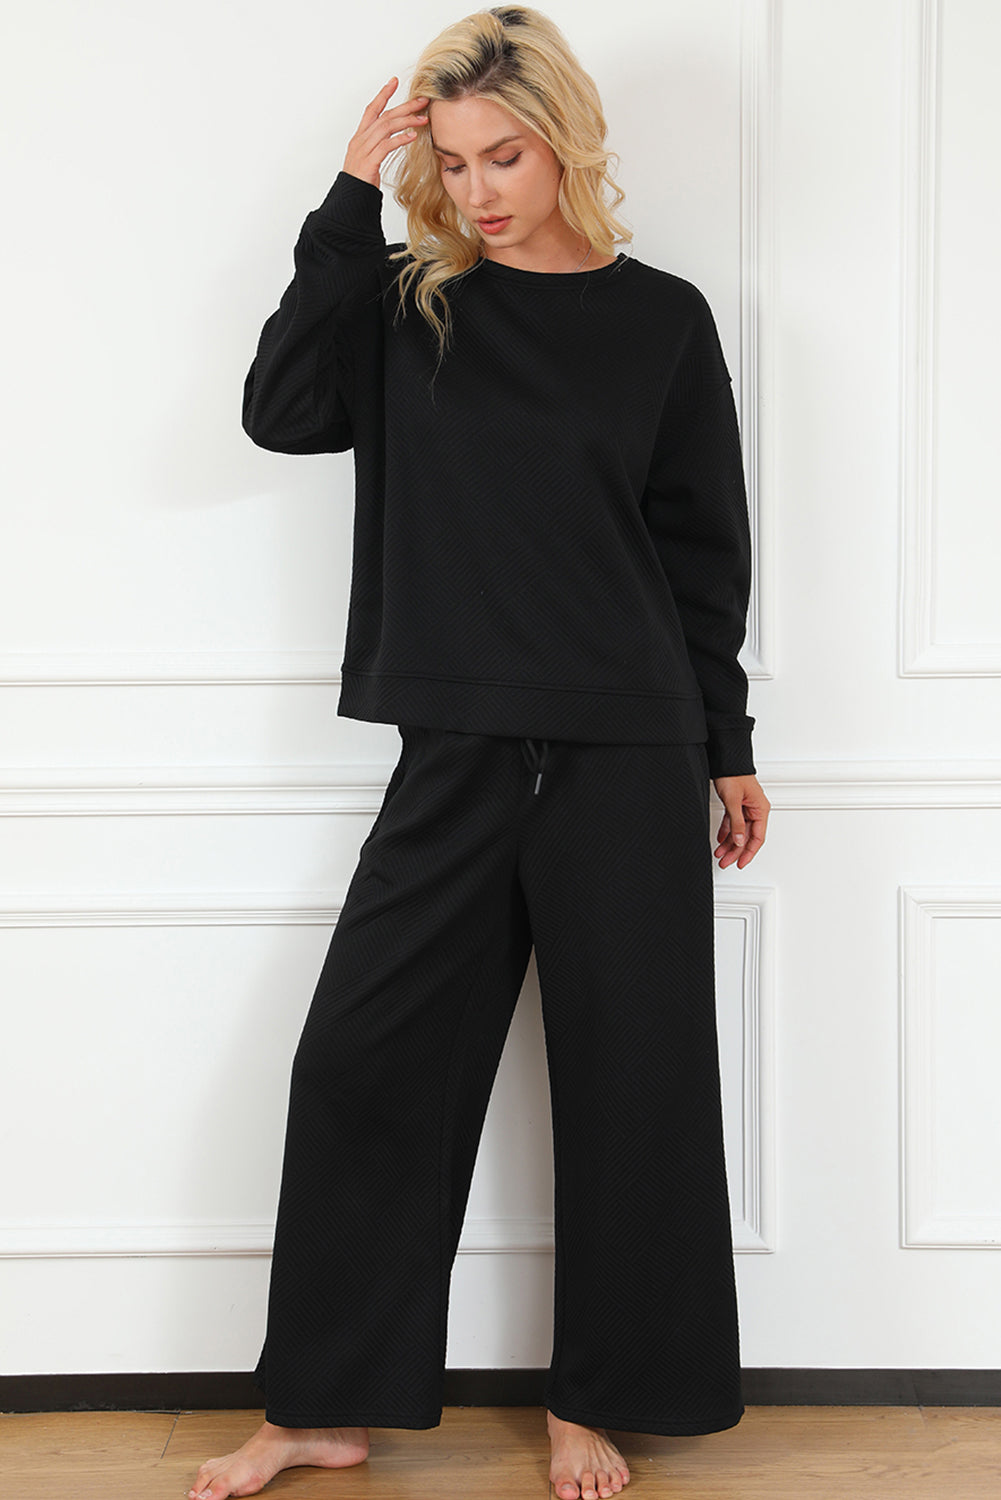 Black Textured Loose Slouchy Long Sleeve Top and Pants Set